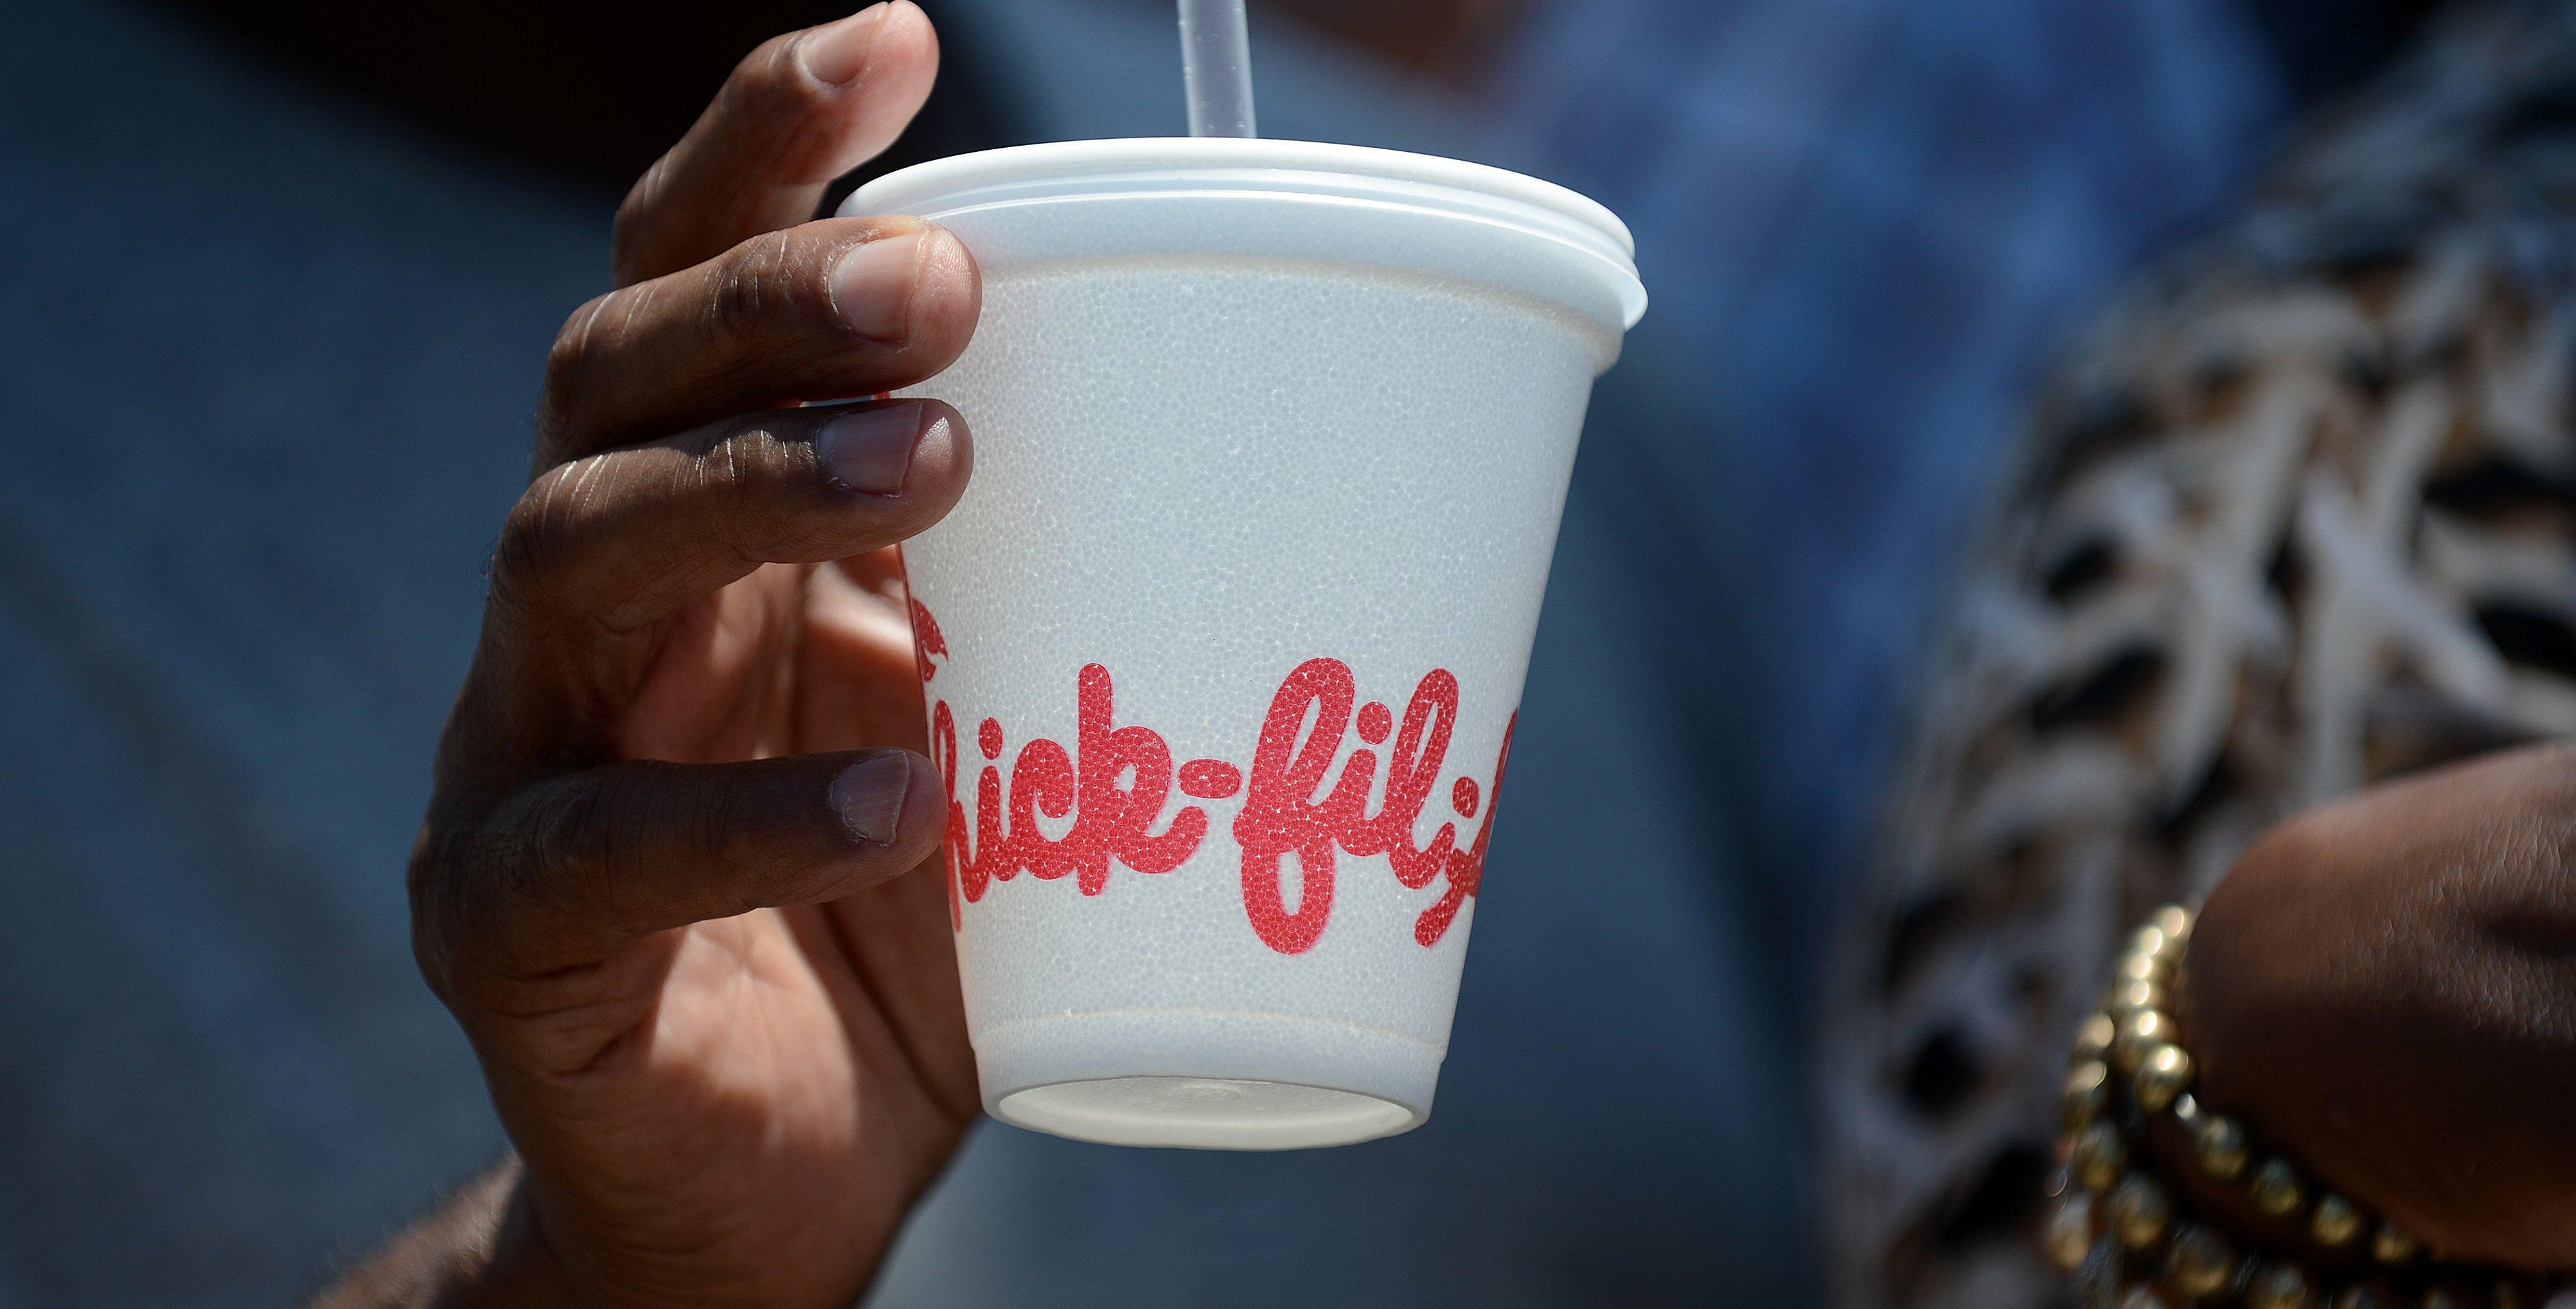 A man carries he drink outside a Chick-fil-A fast food restaurant in Hollywood, Calif. on Aug. 1, 2012.